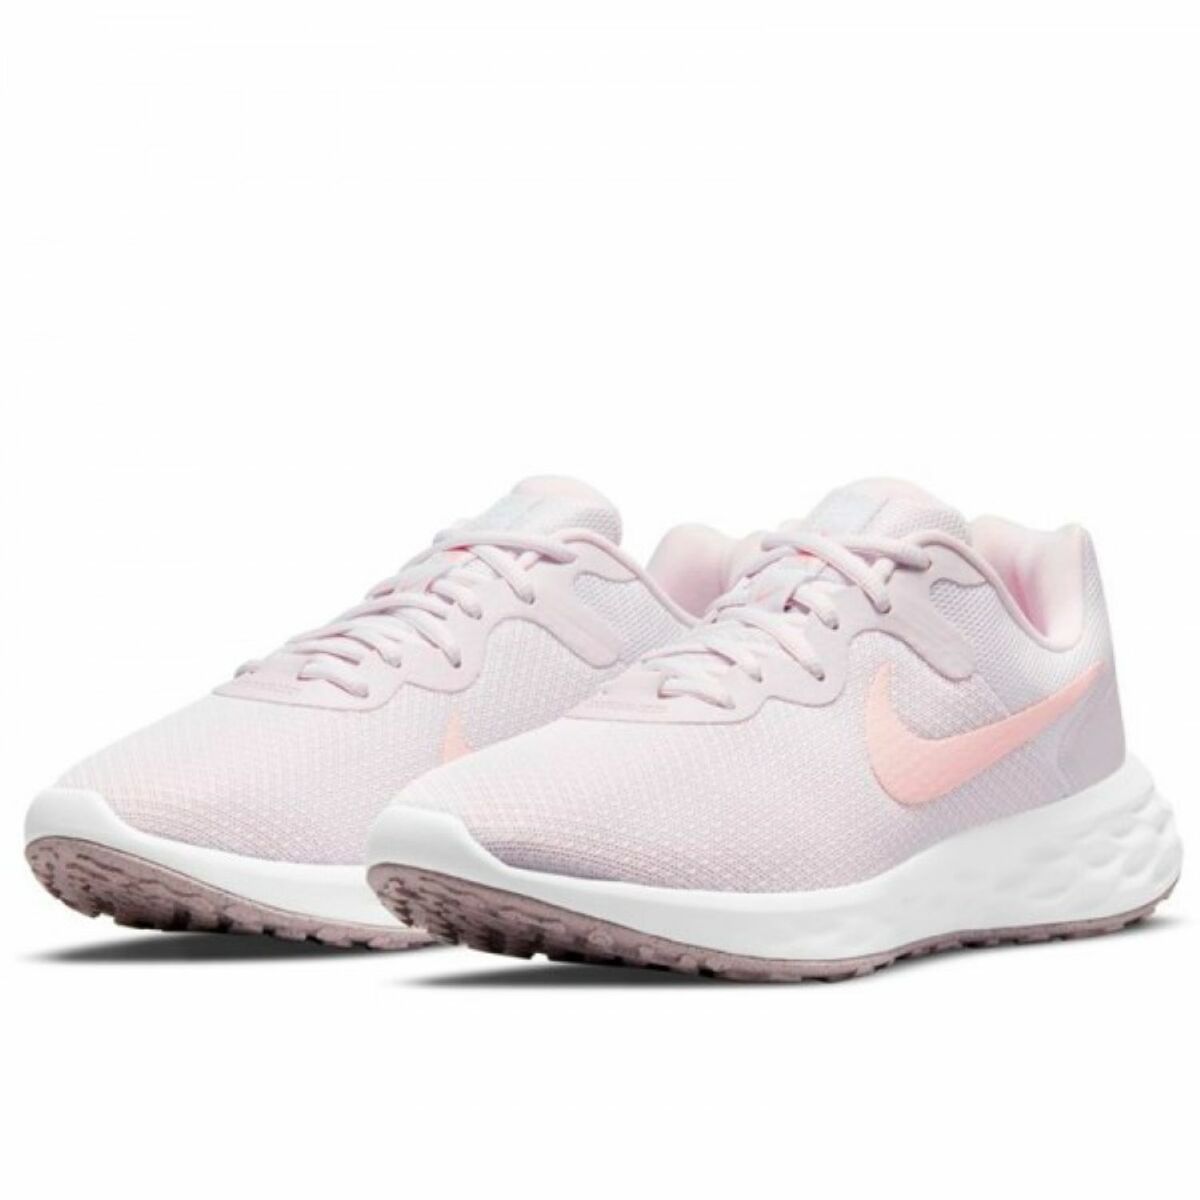 Nike REVOLUTION 6 NEXT NATURE Pink Sports Trainers DC3729 500